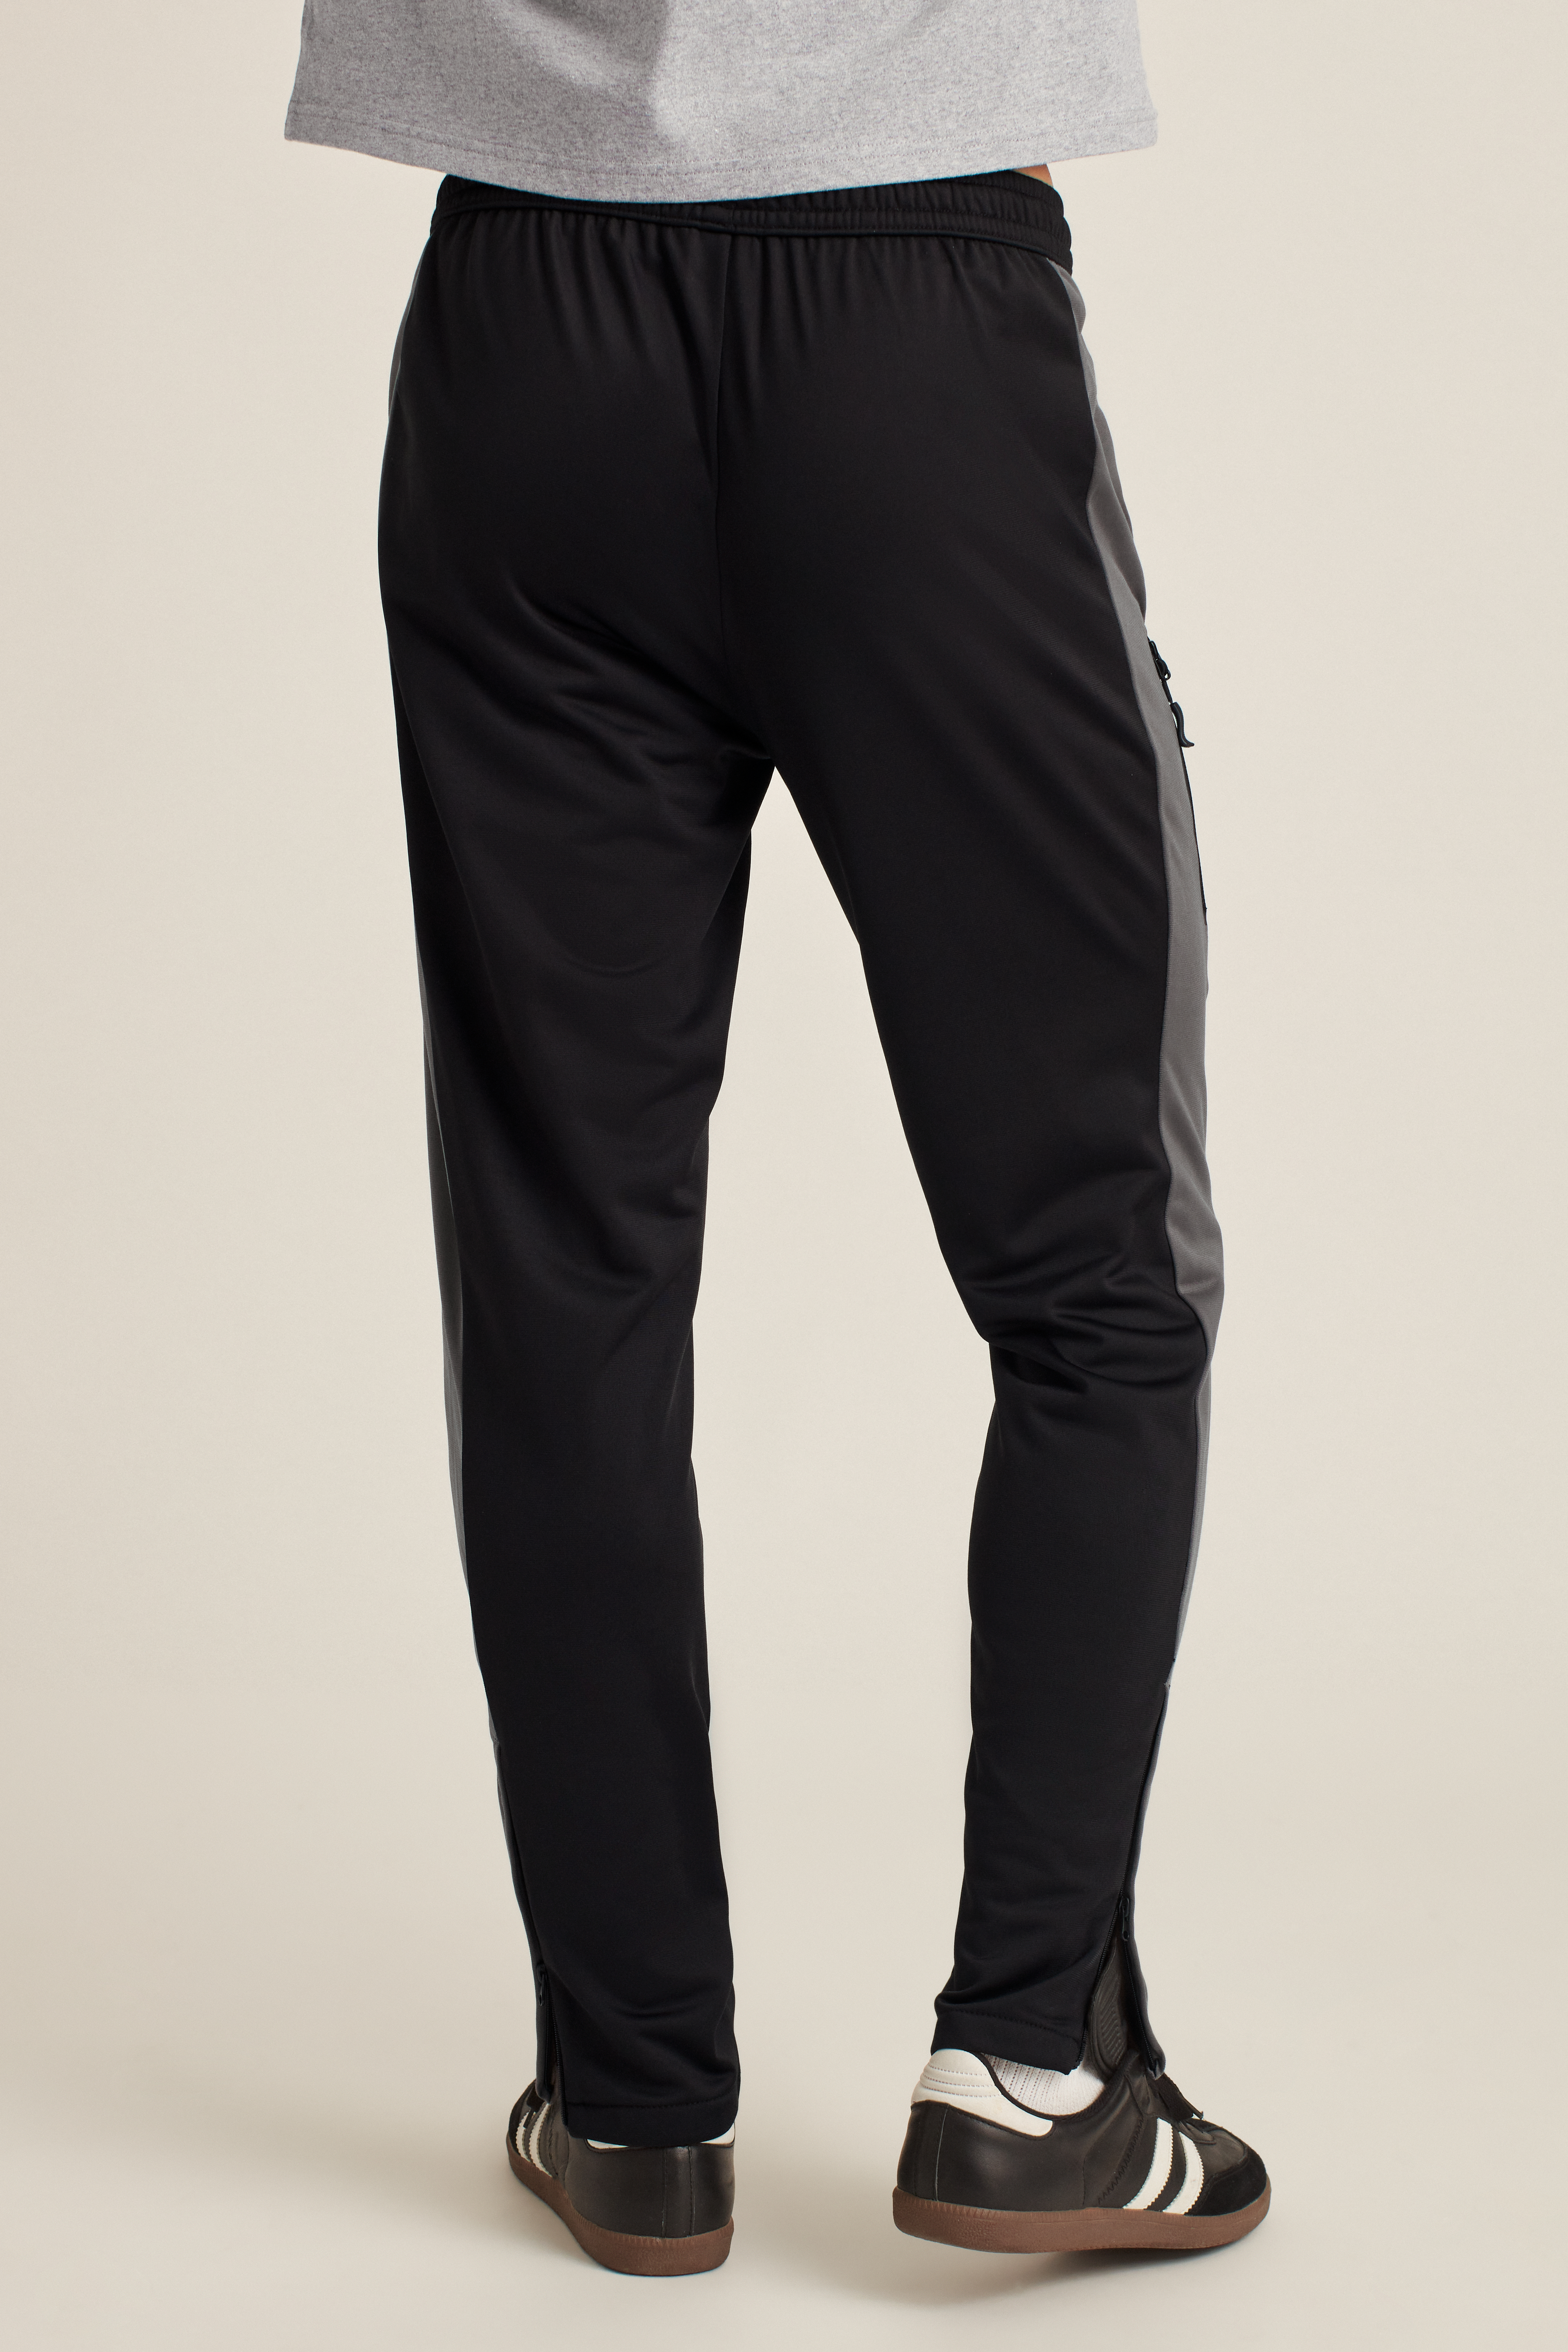 Lululemon athletica Steady State Pant, Men's Joggers